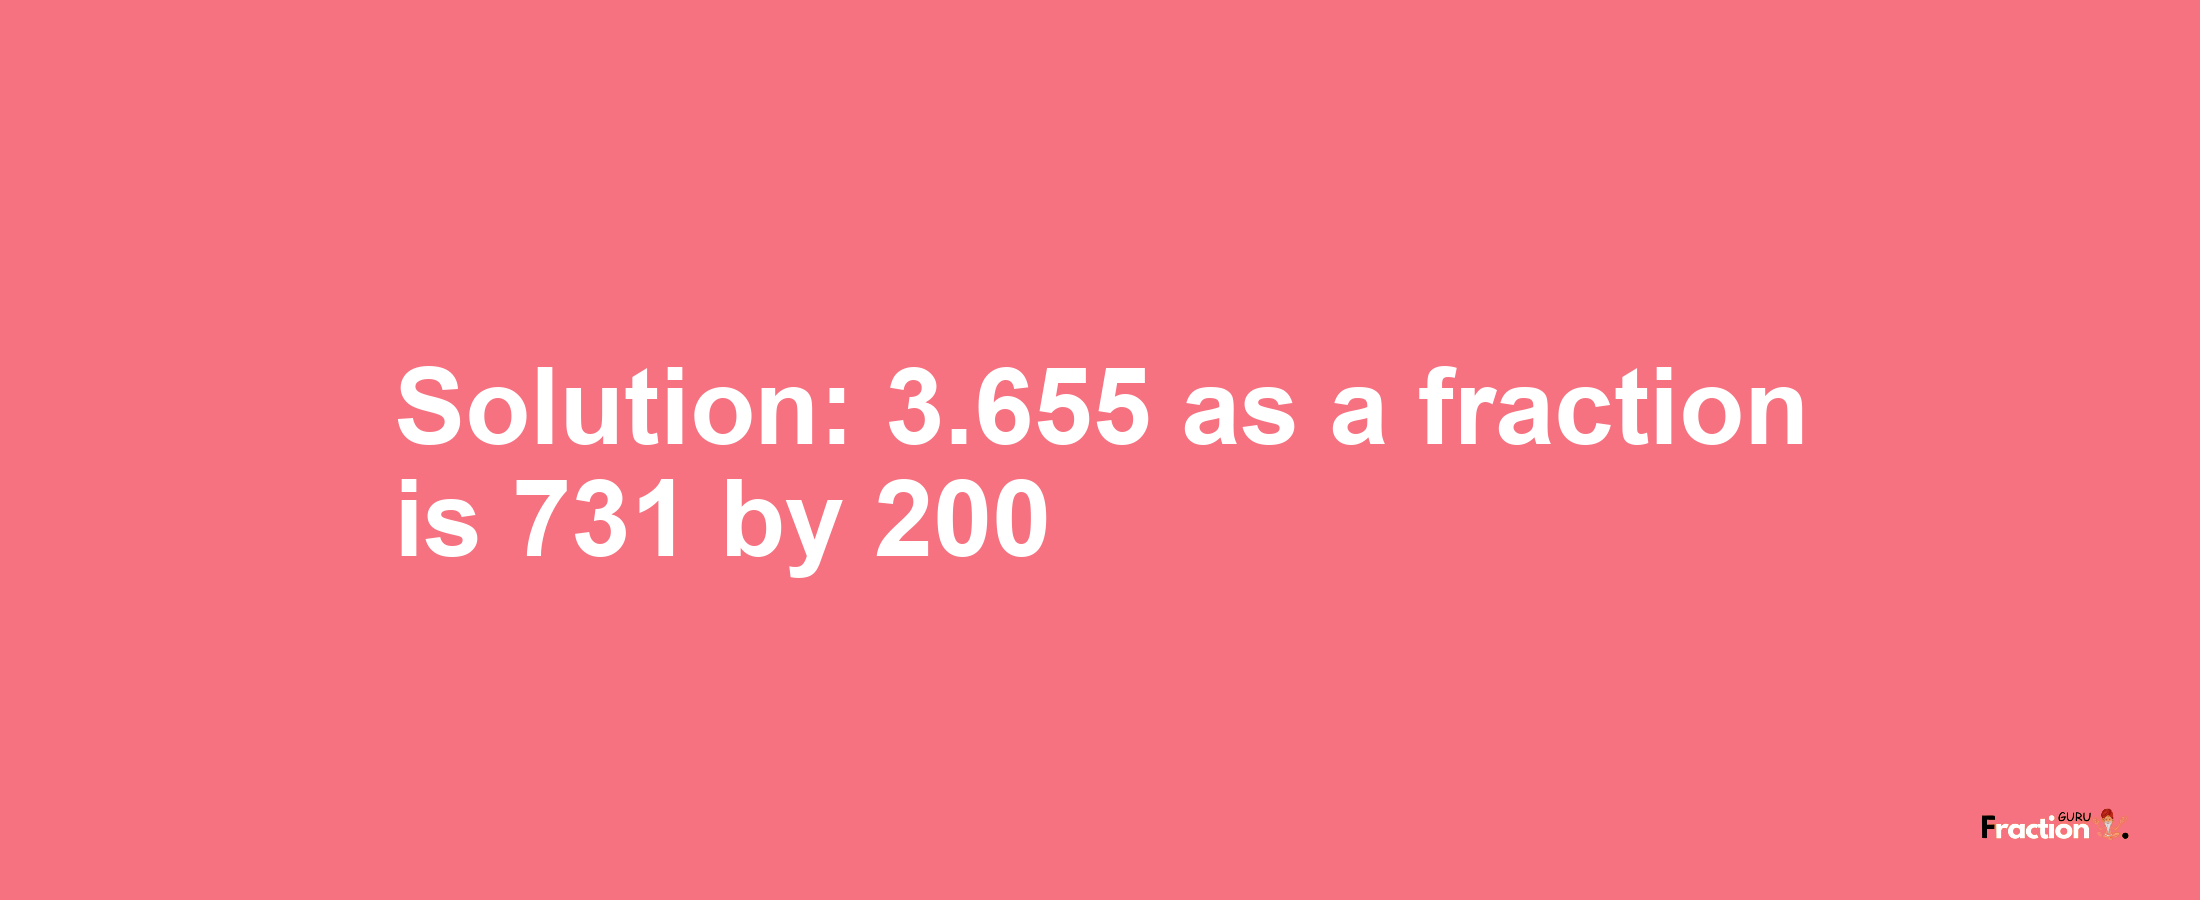 Solution:3.655 as a fraction is 731/200